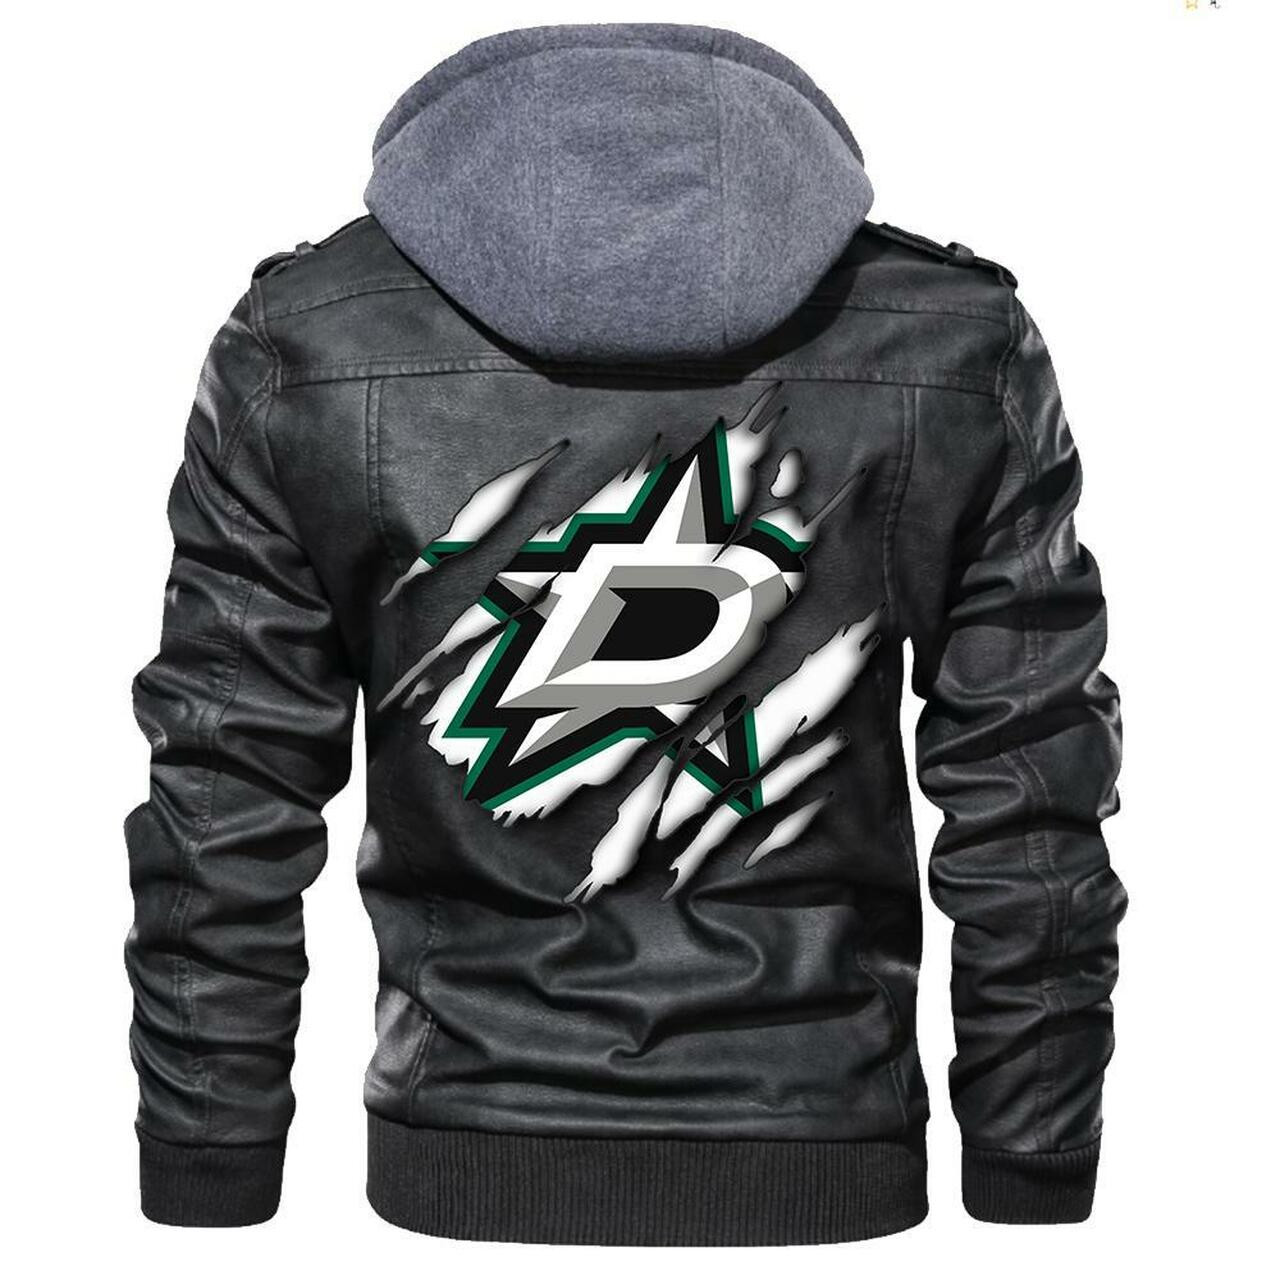 This leather Jacket will look great on you and make you stand out from the crowd 333